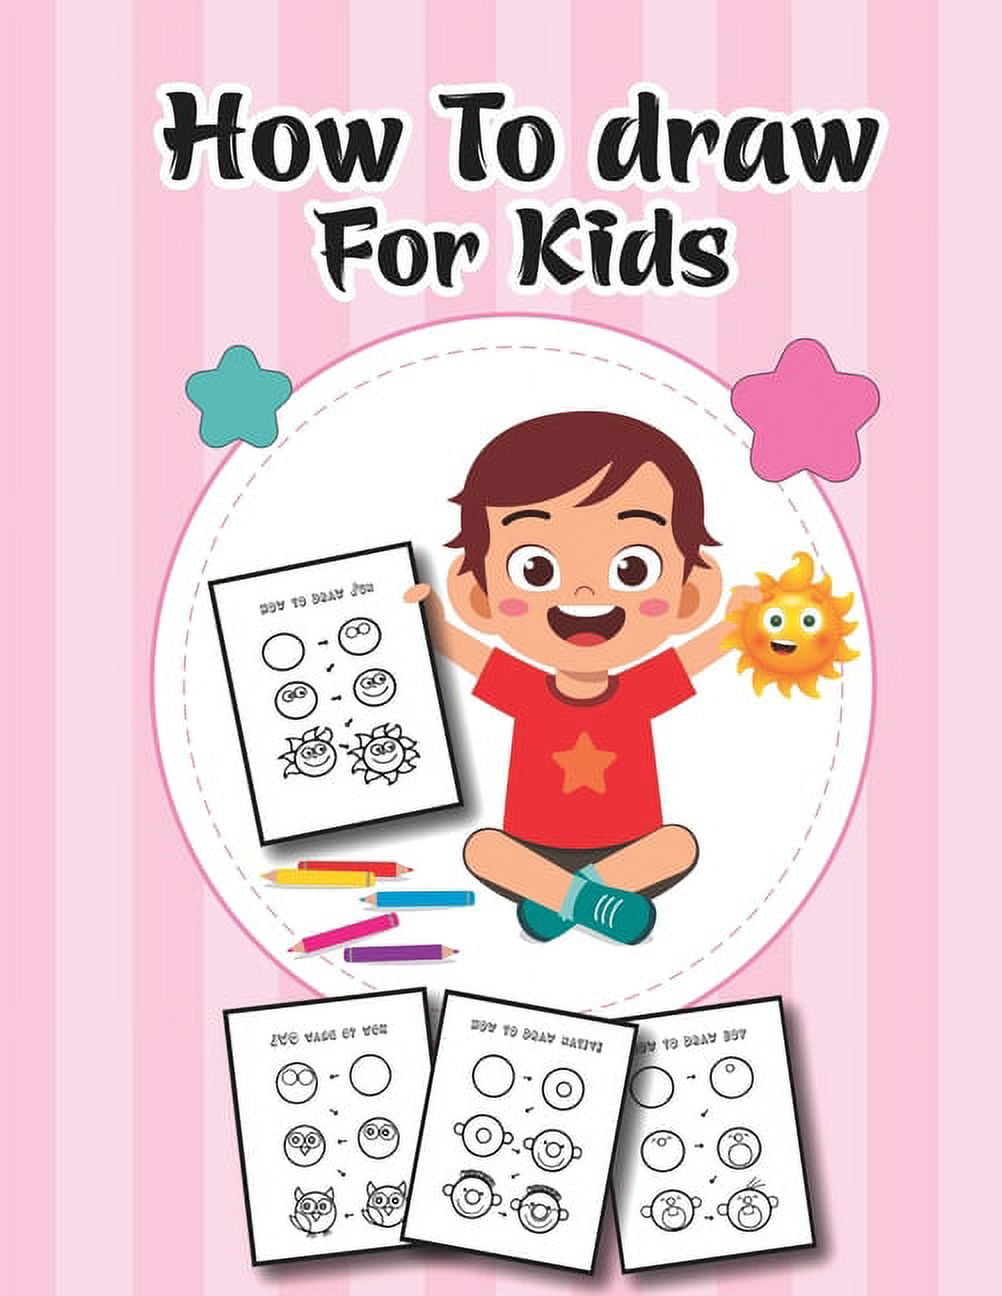 Learn How To Draw For Kids: Big Easy How To Draw Book For Kids Ages 8-12  9-12, 20+ Tutorials Learn To Draw